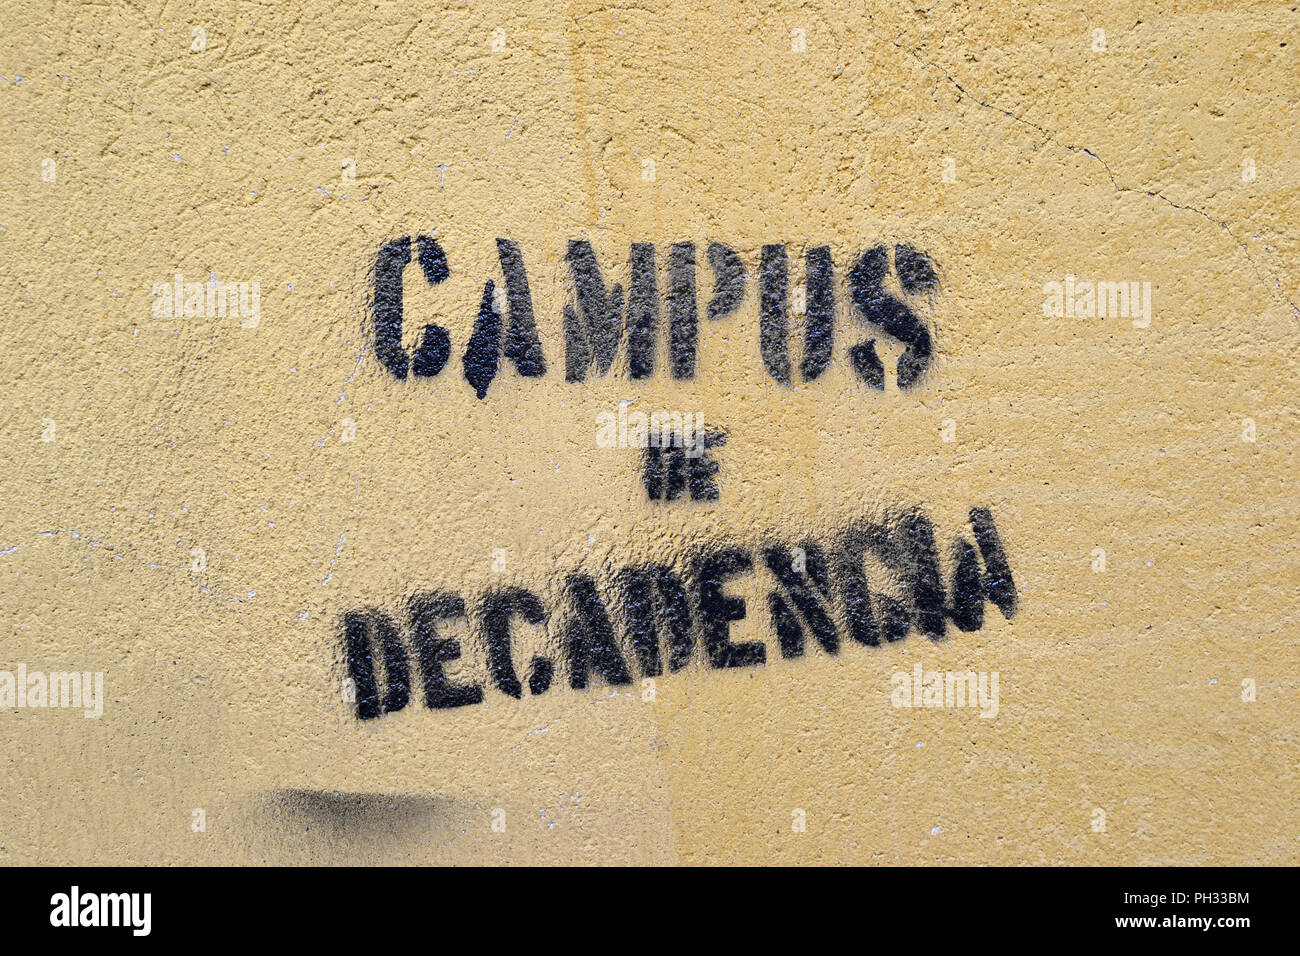 Stenciled political graffiti on a wall at the campus of the University of Oviedo, in Oviedo, Asturias, Spain, claiming it to be a 'campus of decline.' Stock Photo